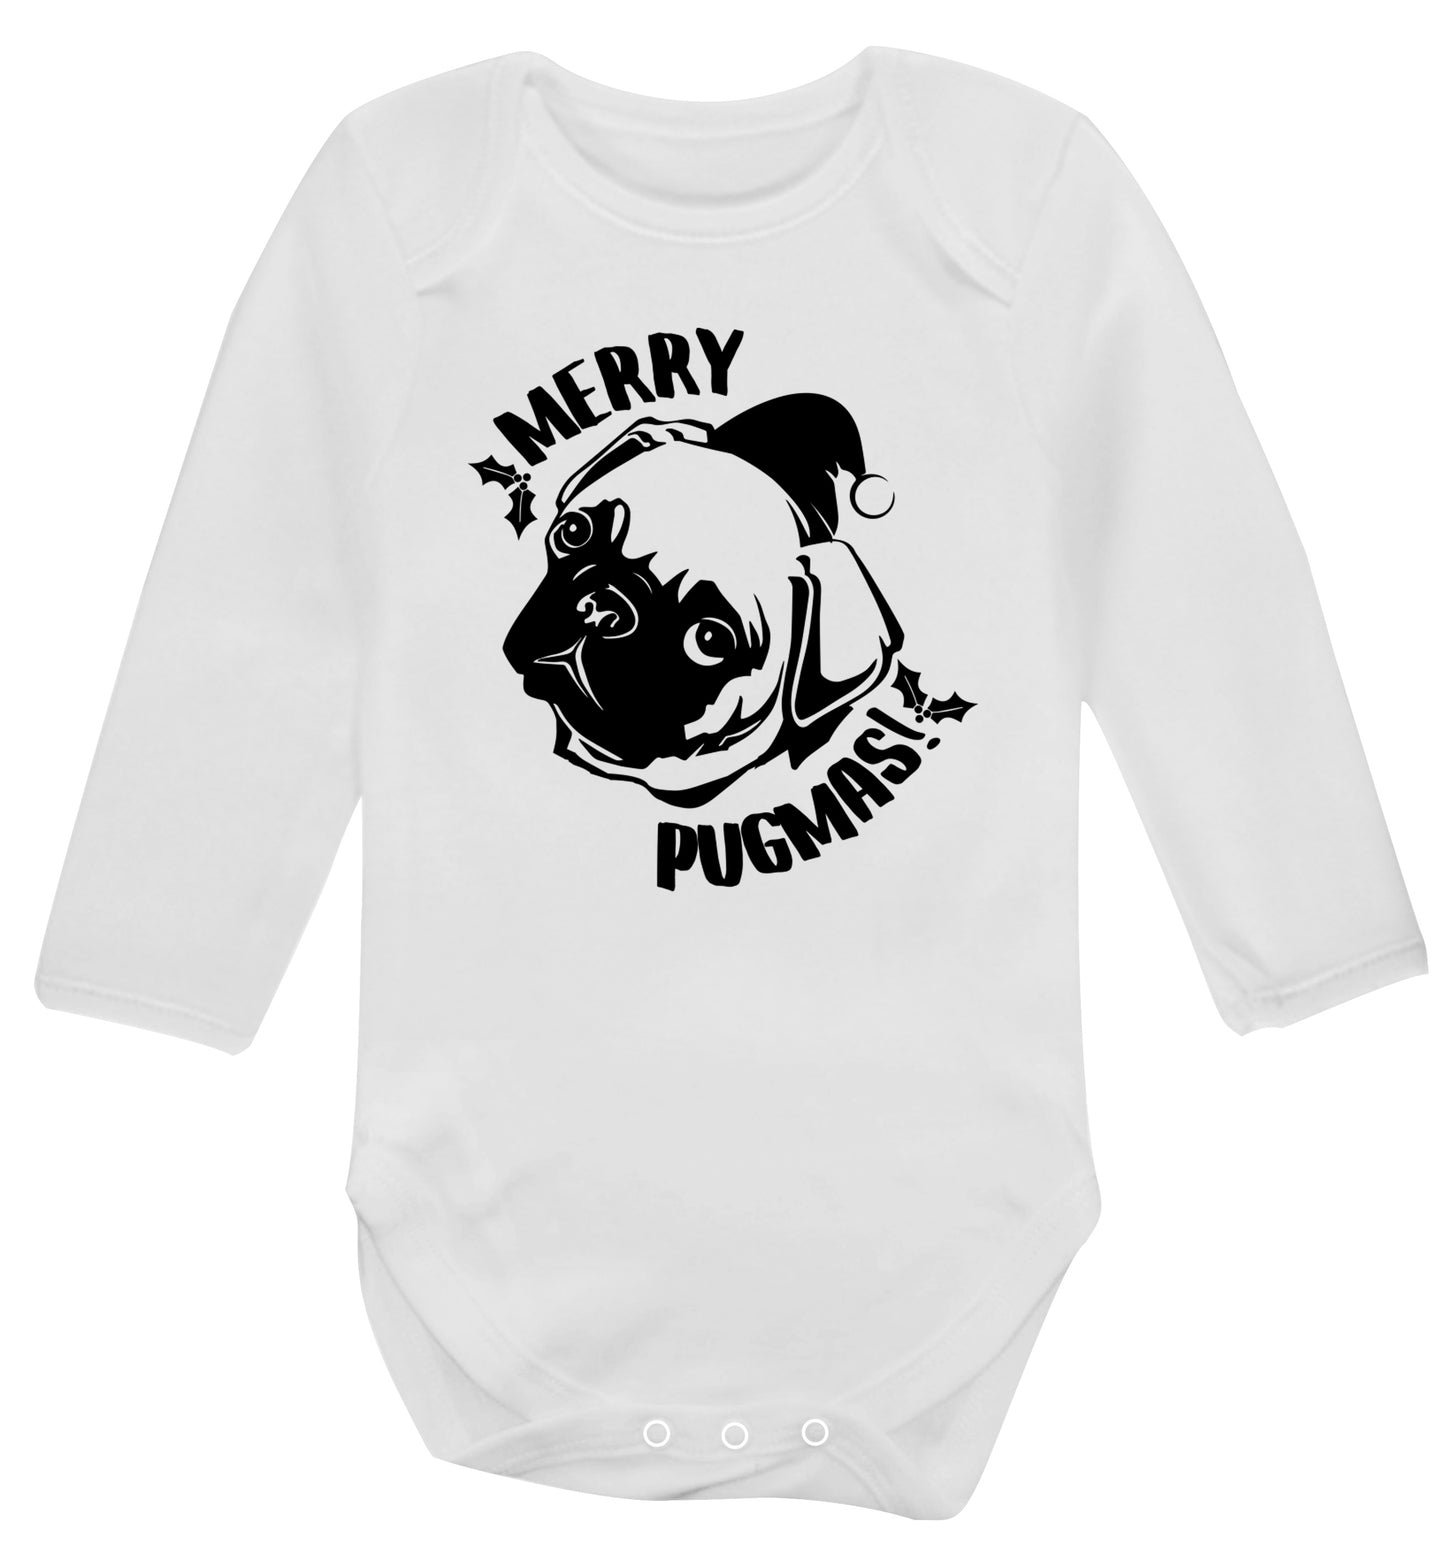 Merry Pugmas Baby Vest long sleeved white 6-12 months